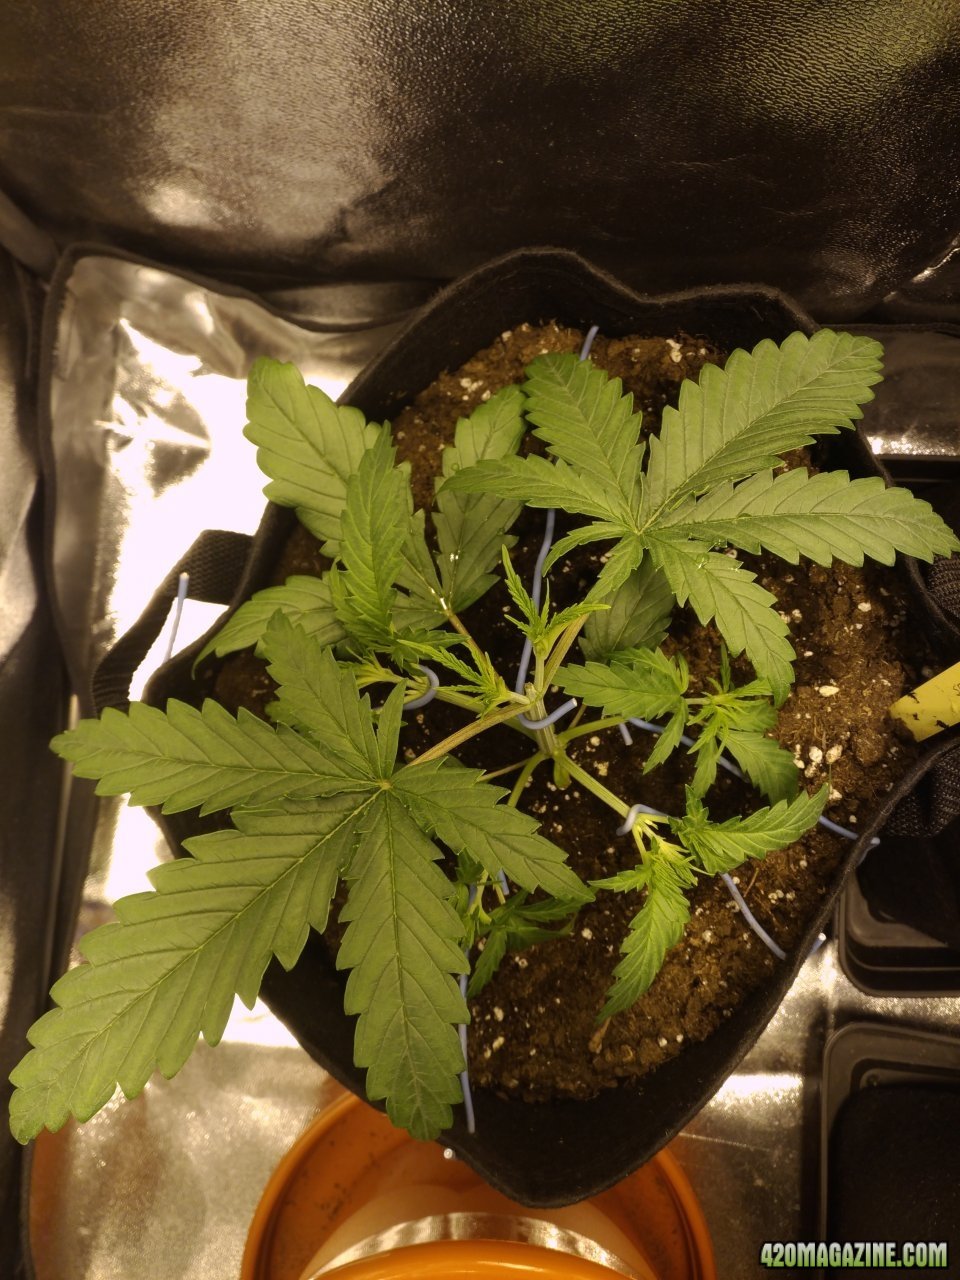 day 20 - sexbud first time trying LST